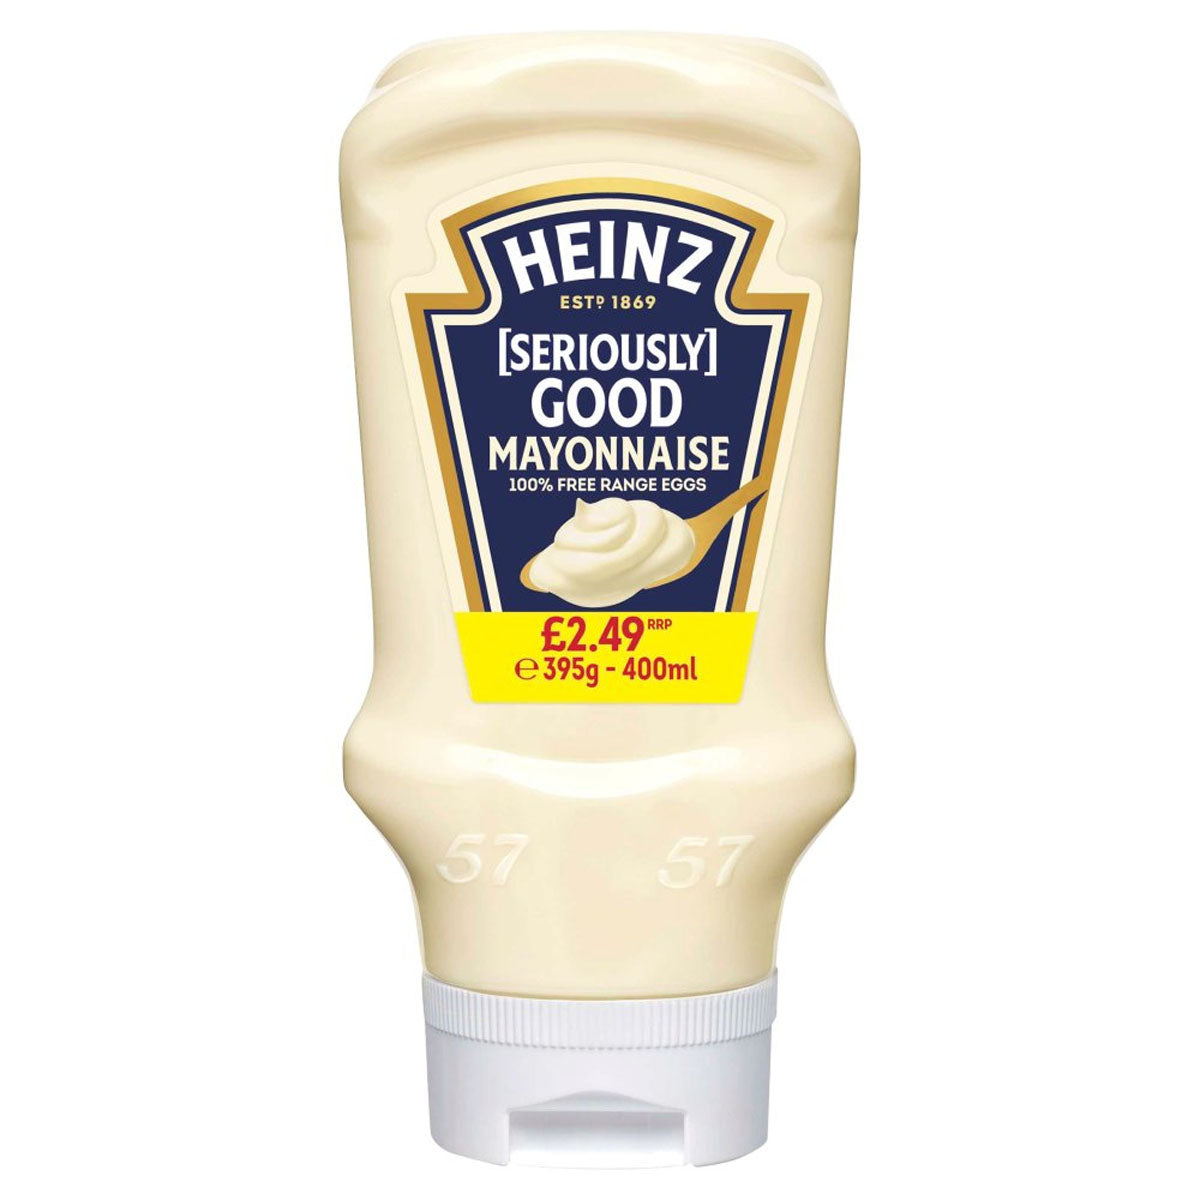 Heinz - [Seriously] Good Mayonnaise - 395g - Continental Food Store